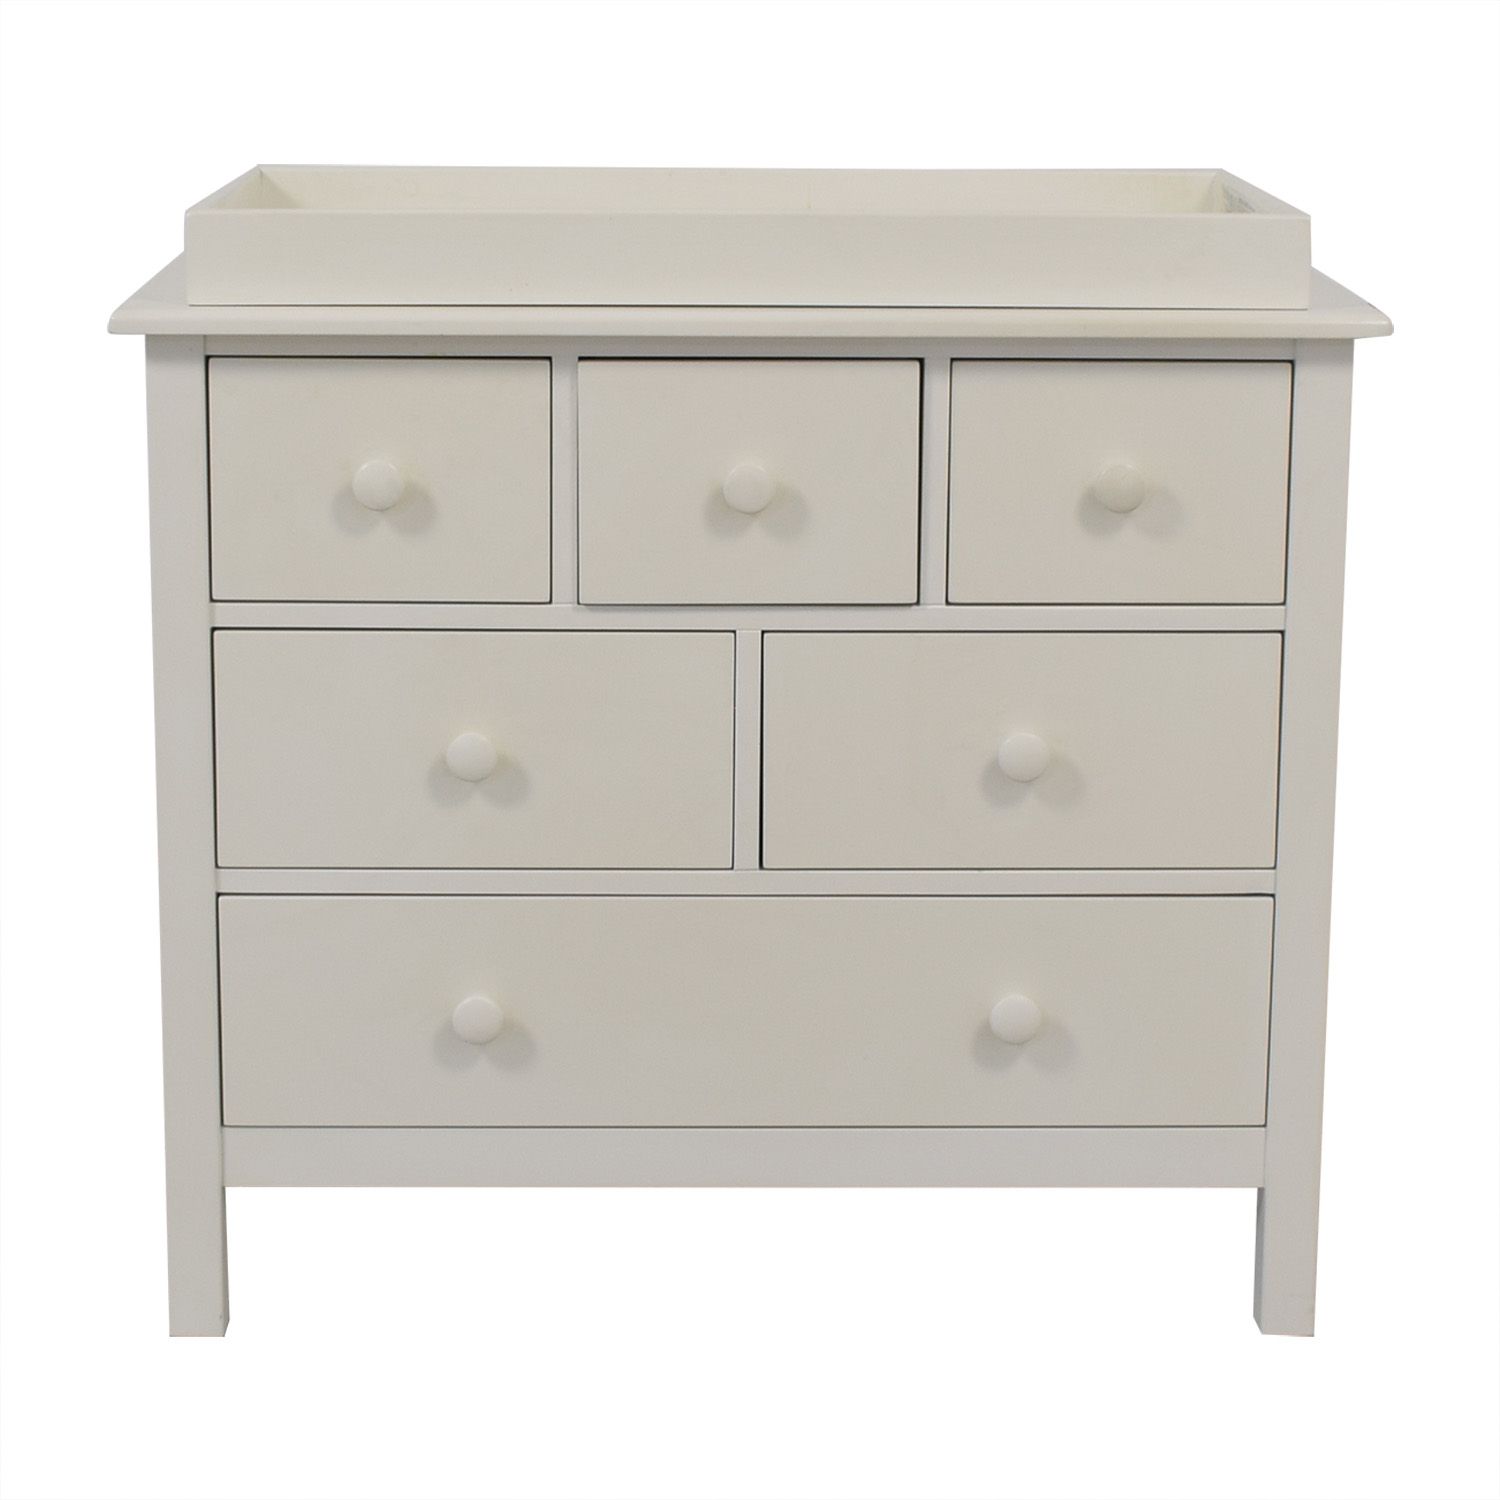 72% Off – Pottery Barn Kids Pottery Barn Kids Kendall Dresser And Changing  Table / Storage Pertaining To Kendall Sideboards (View 12 of 30)